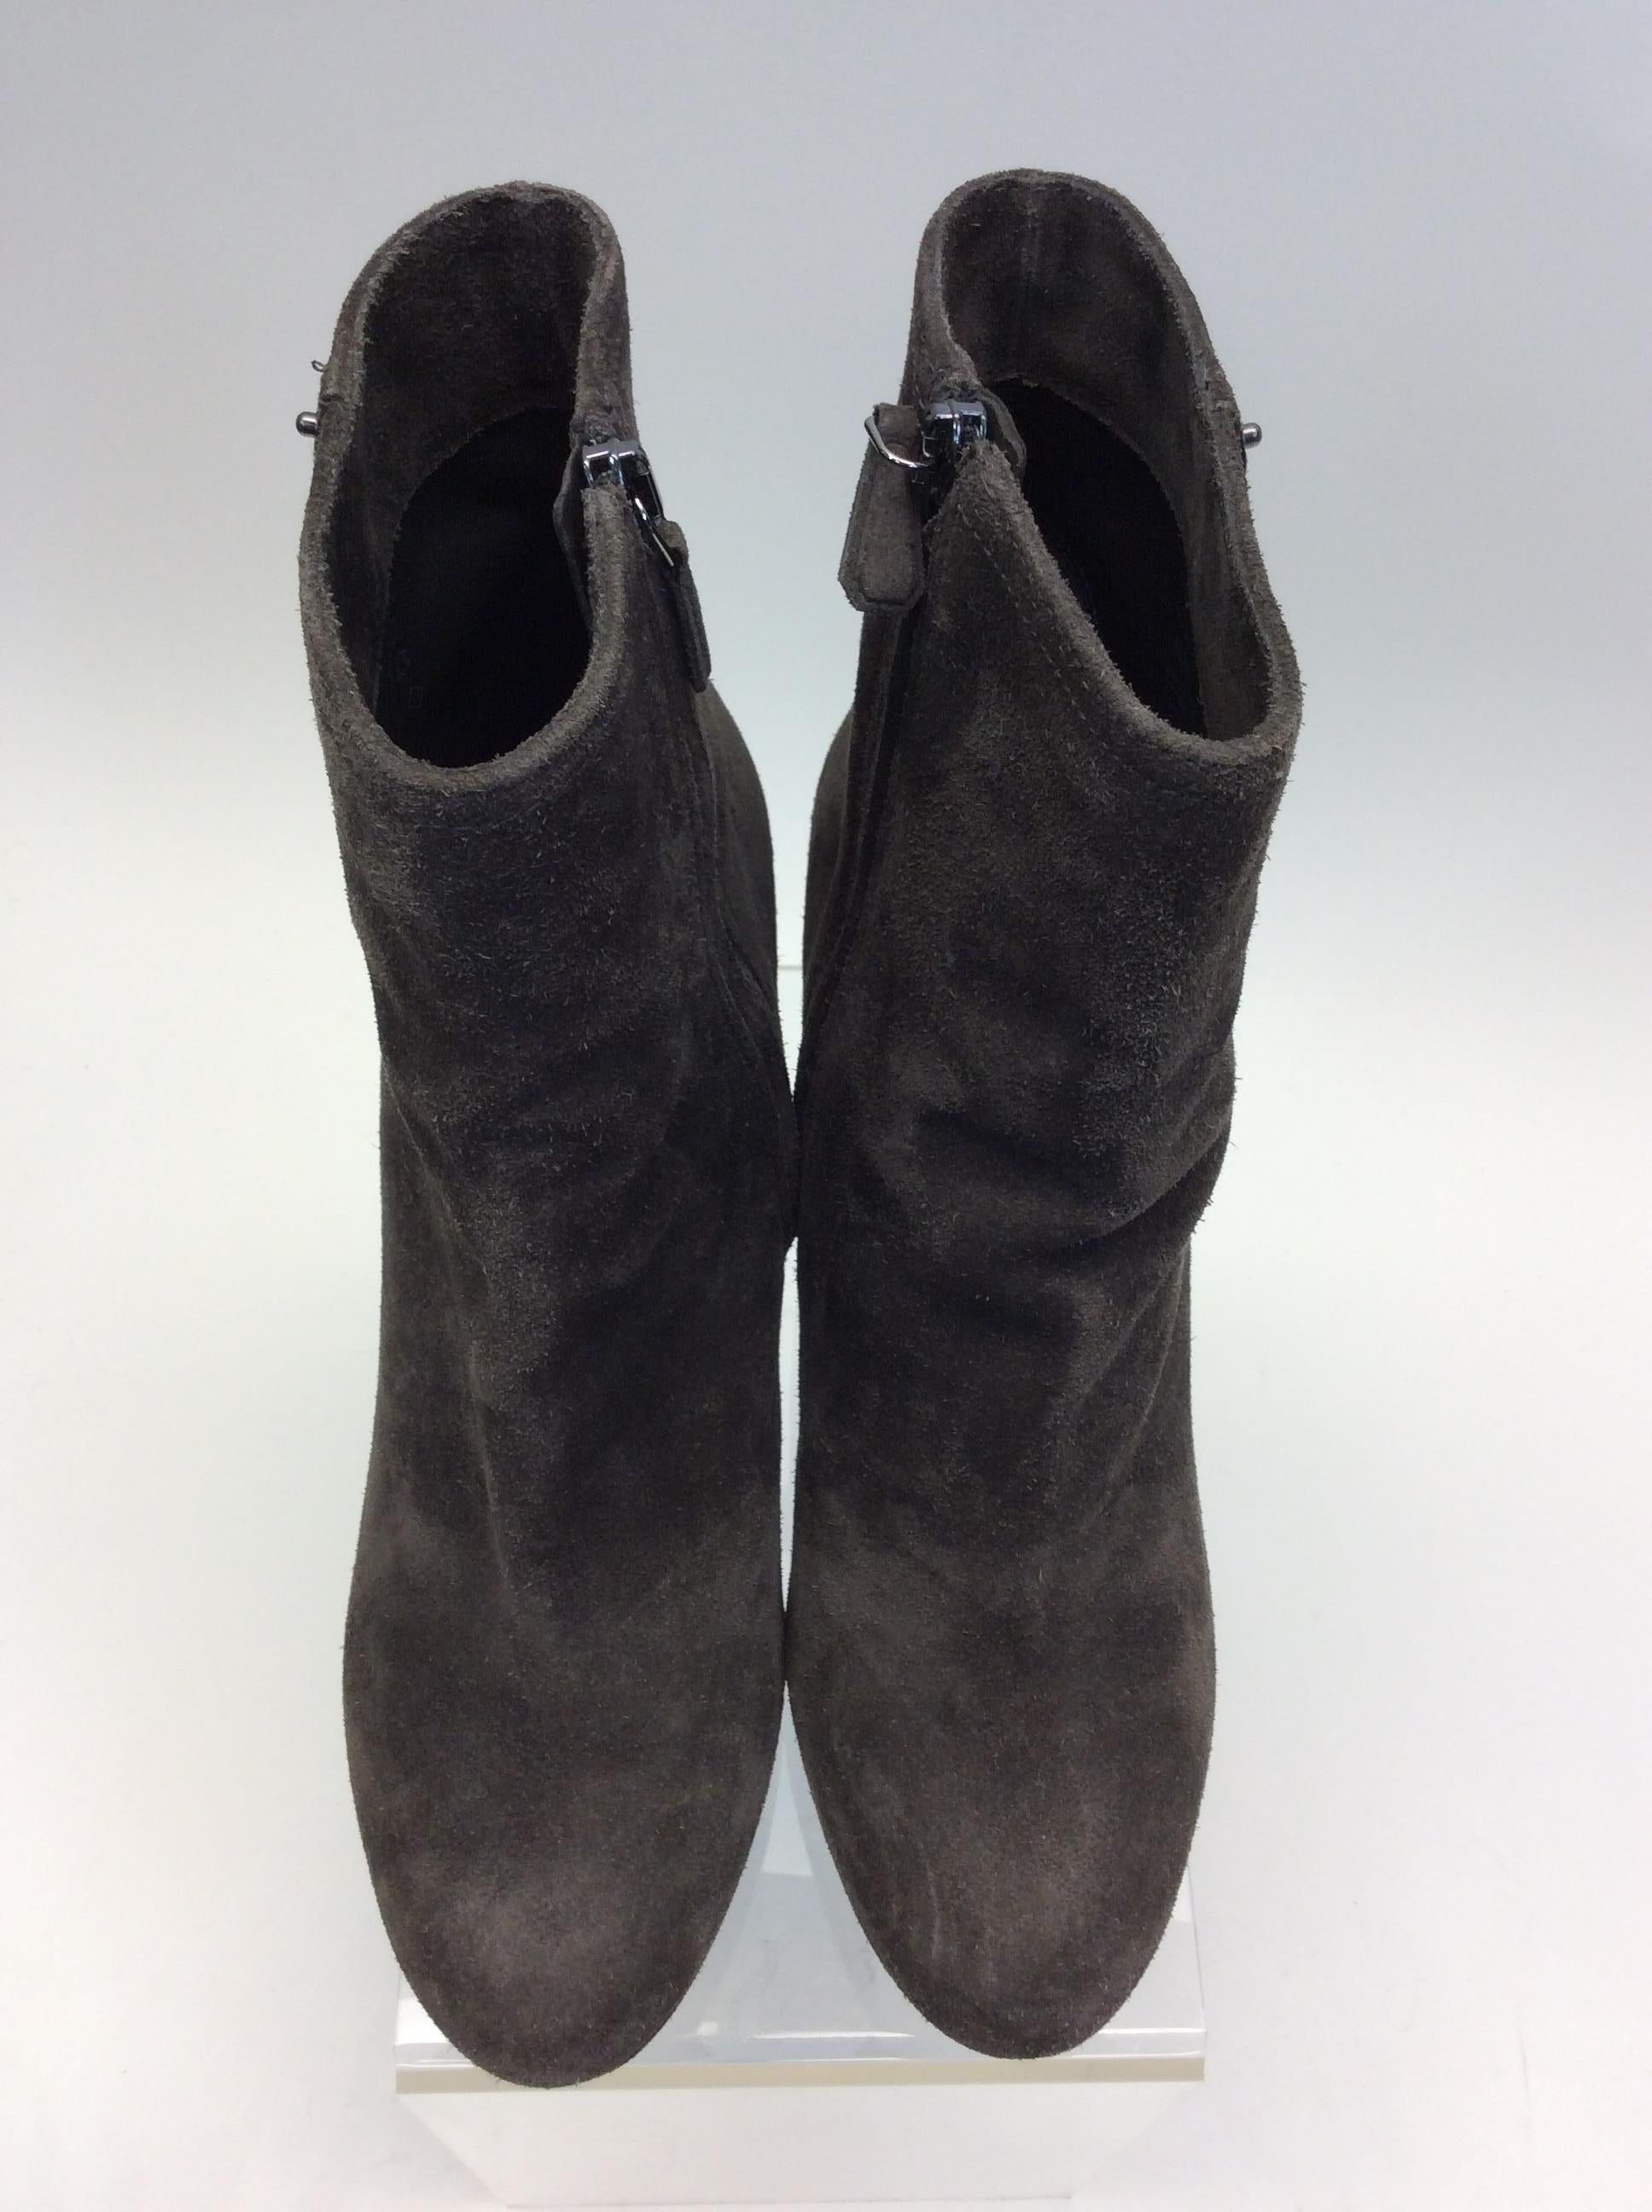 Prada Brown Suede Wedge Bootie In Good Condition For Sale In Narberth, PA